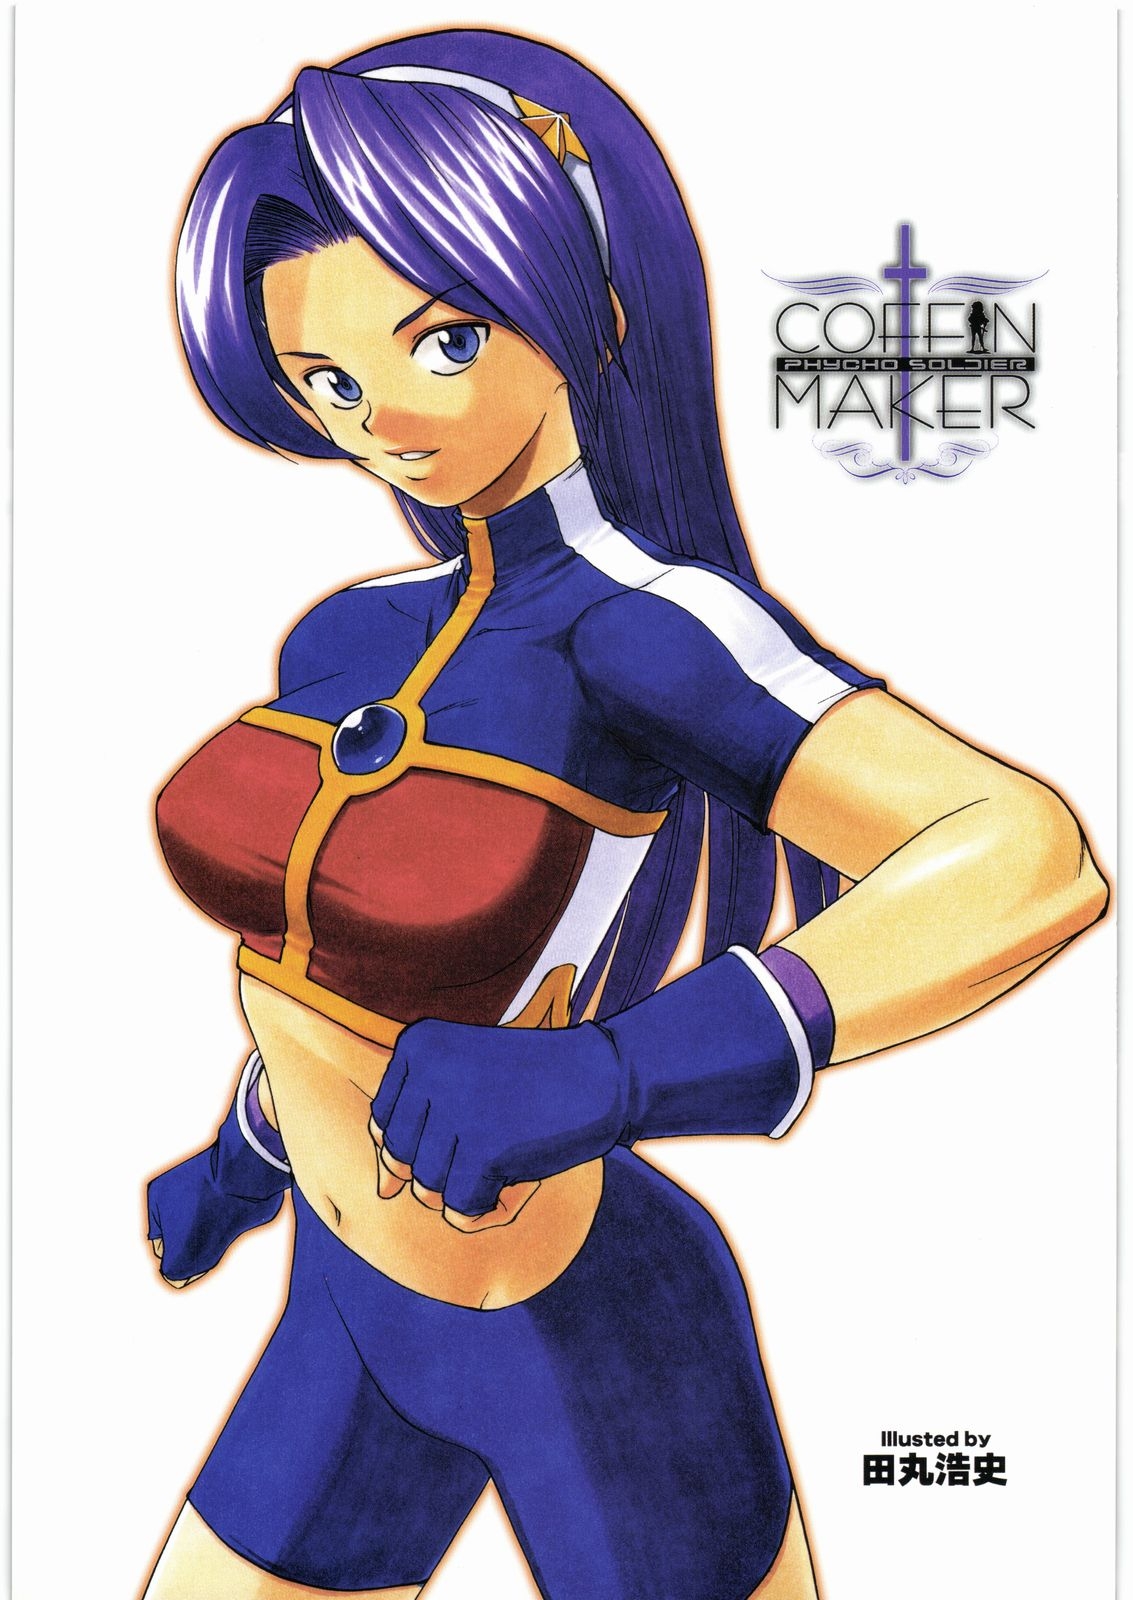 [Kacchuu Musume (Various)] COFFIN MAKER -PHYCHO SOLDIER- (King of Fighter) 1